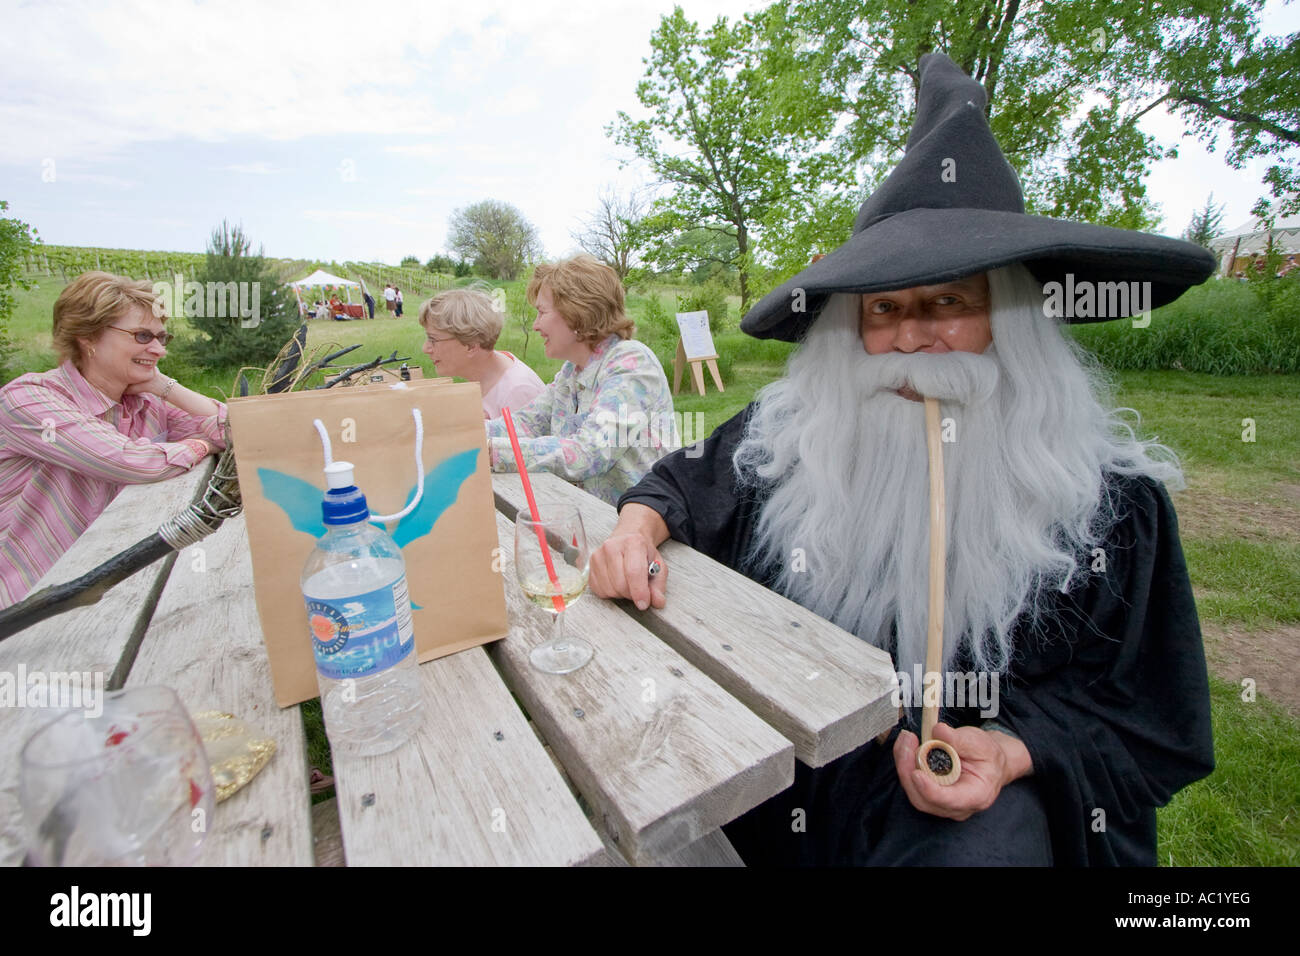 A man dressed up as a wizard at a renaissance festival in Nebraska. Stock Photo